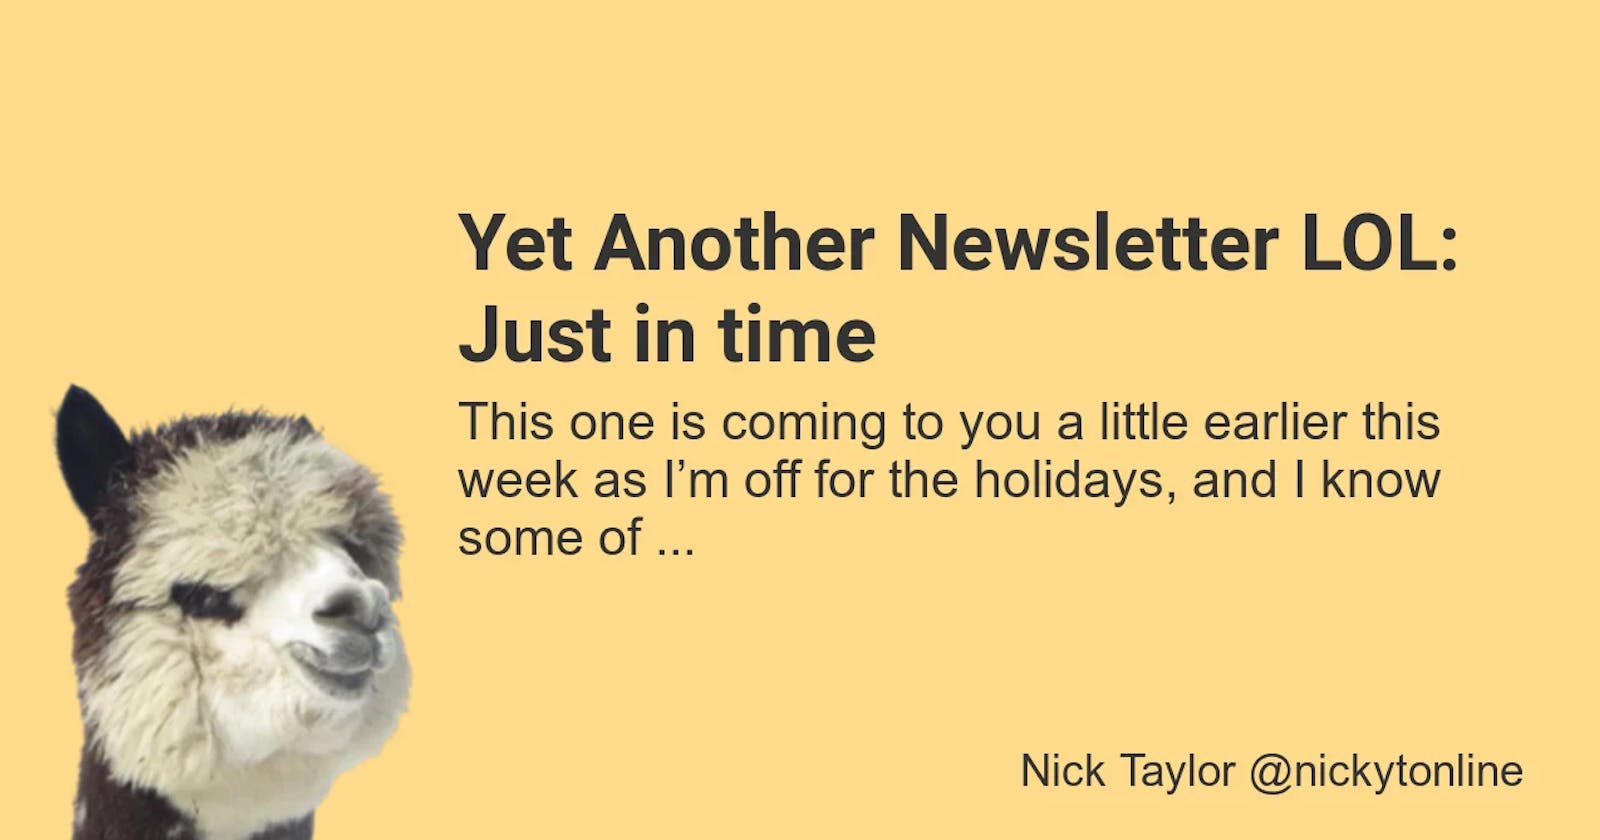 Yet Another Newsletter LOL: Just in time